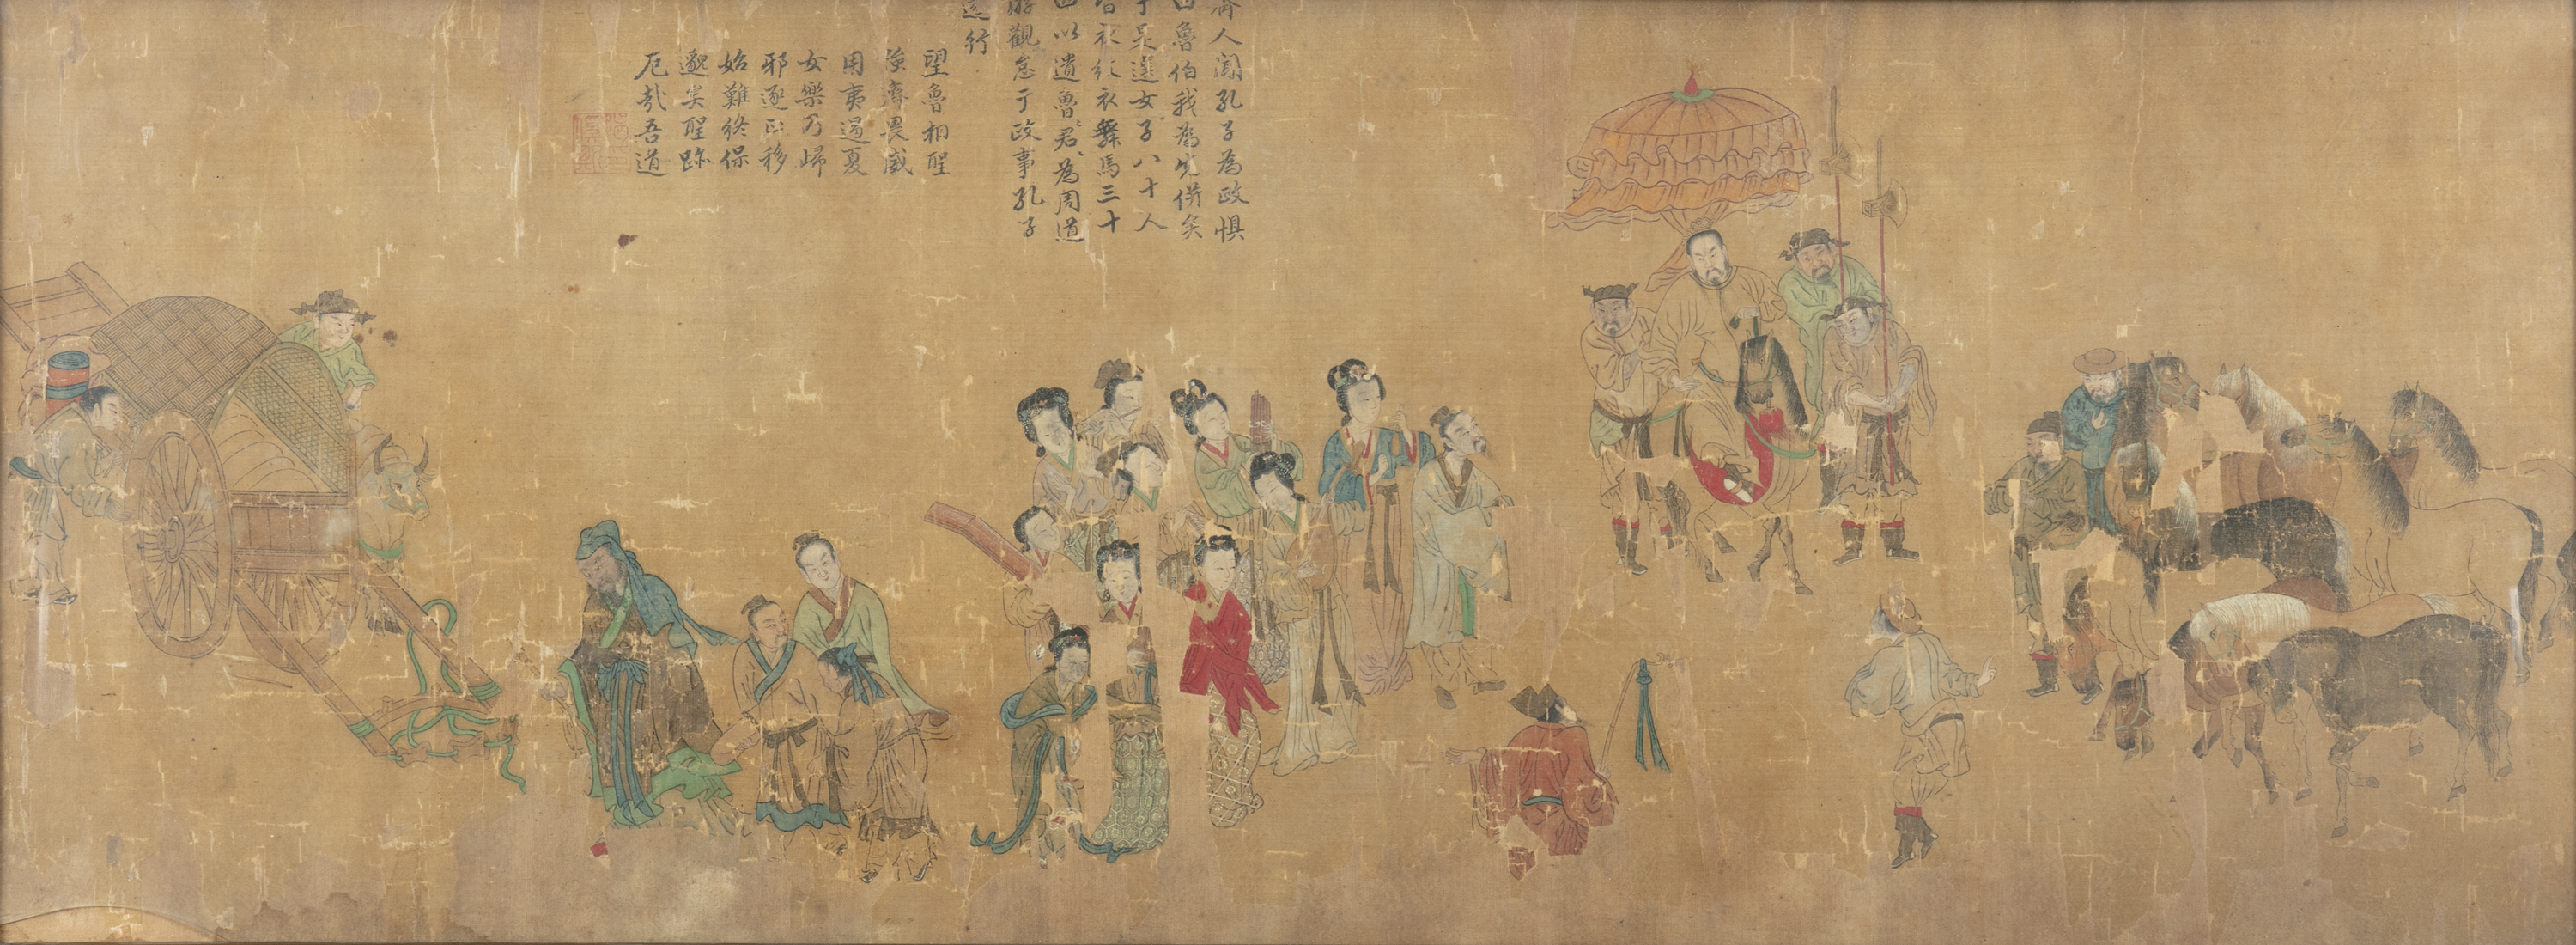 CHINESE SCHOOL, SIGNATURE OF JIE XISI 揭傒斯 (1274-1344) A procession with numerous dignitaries Ink and - Image 2 of 10